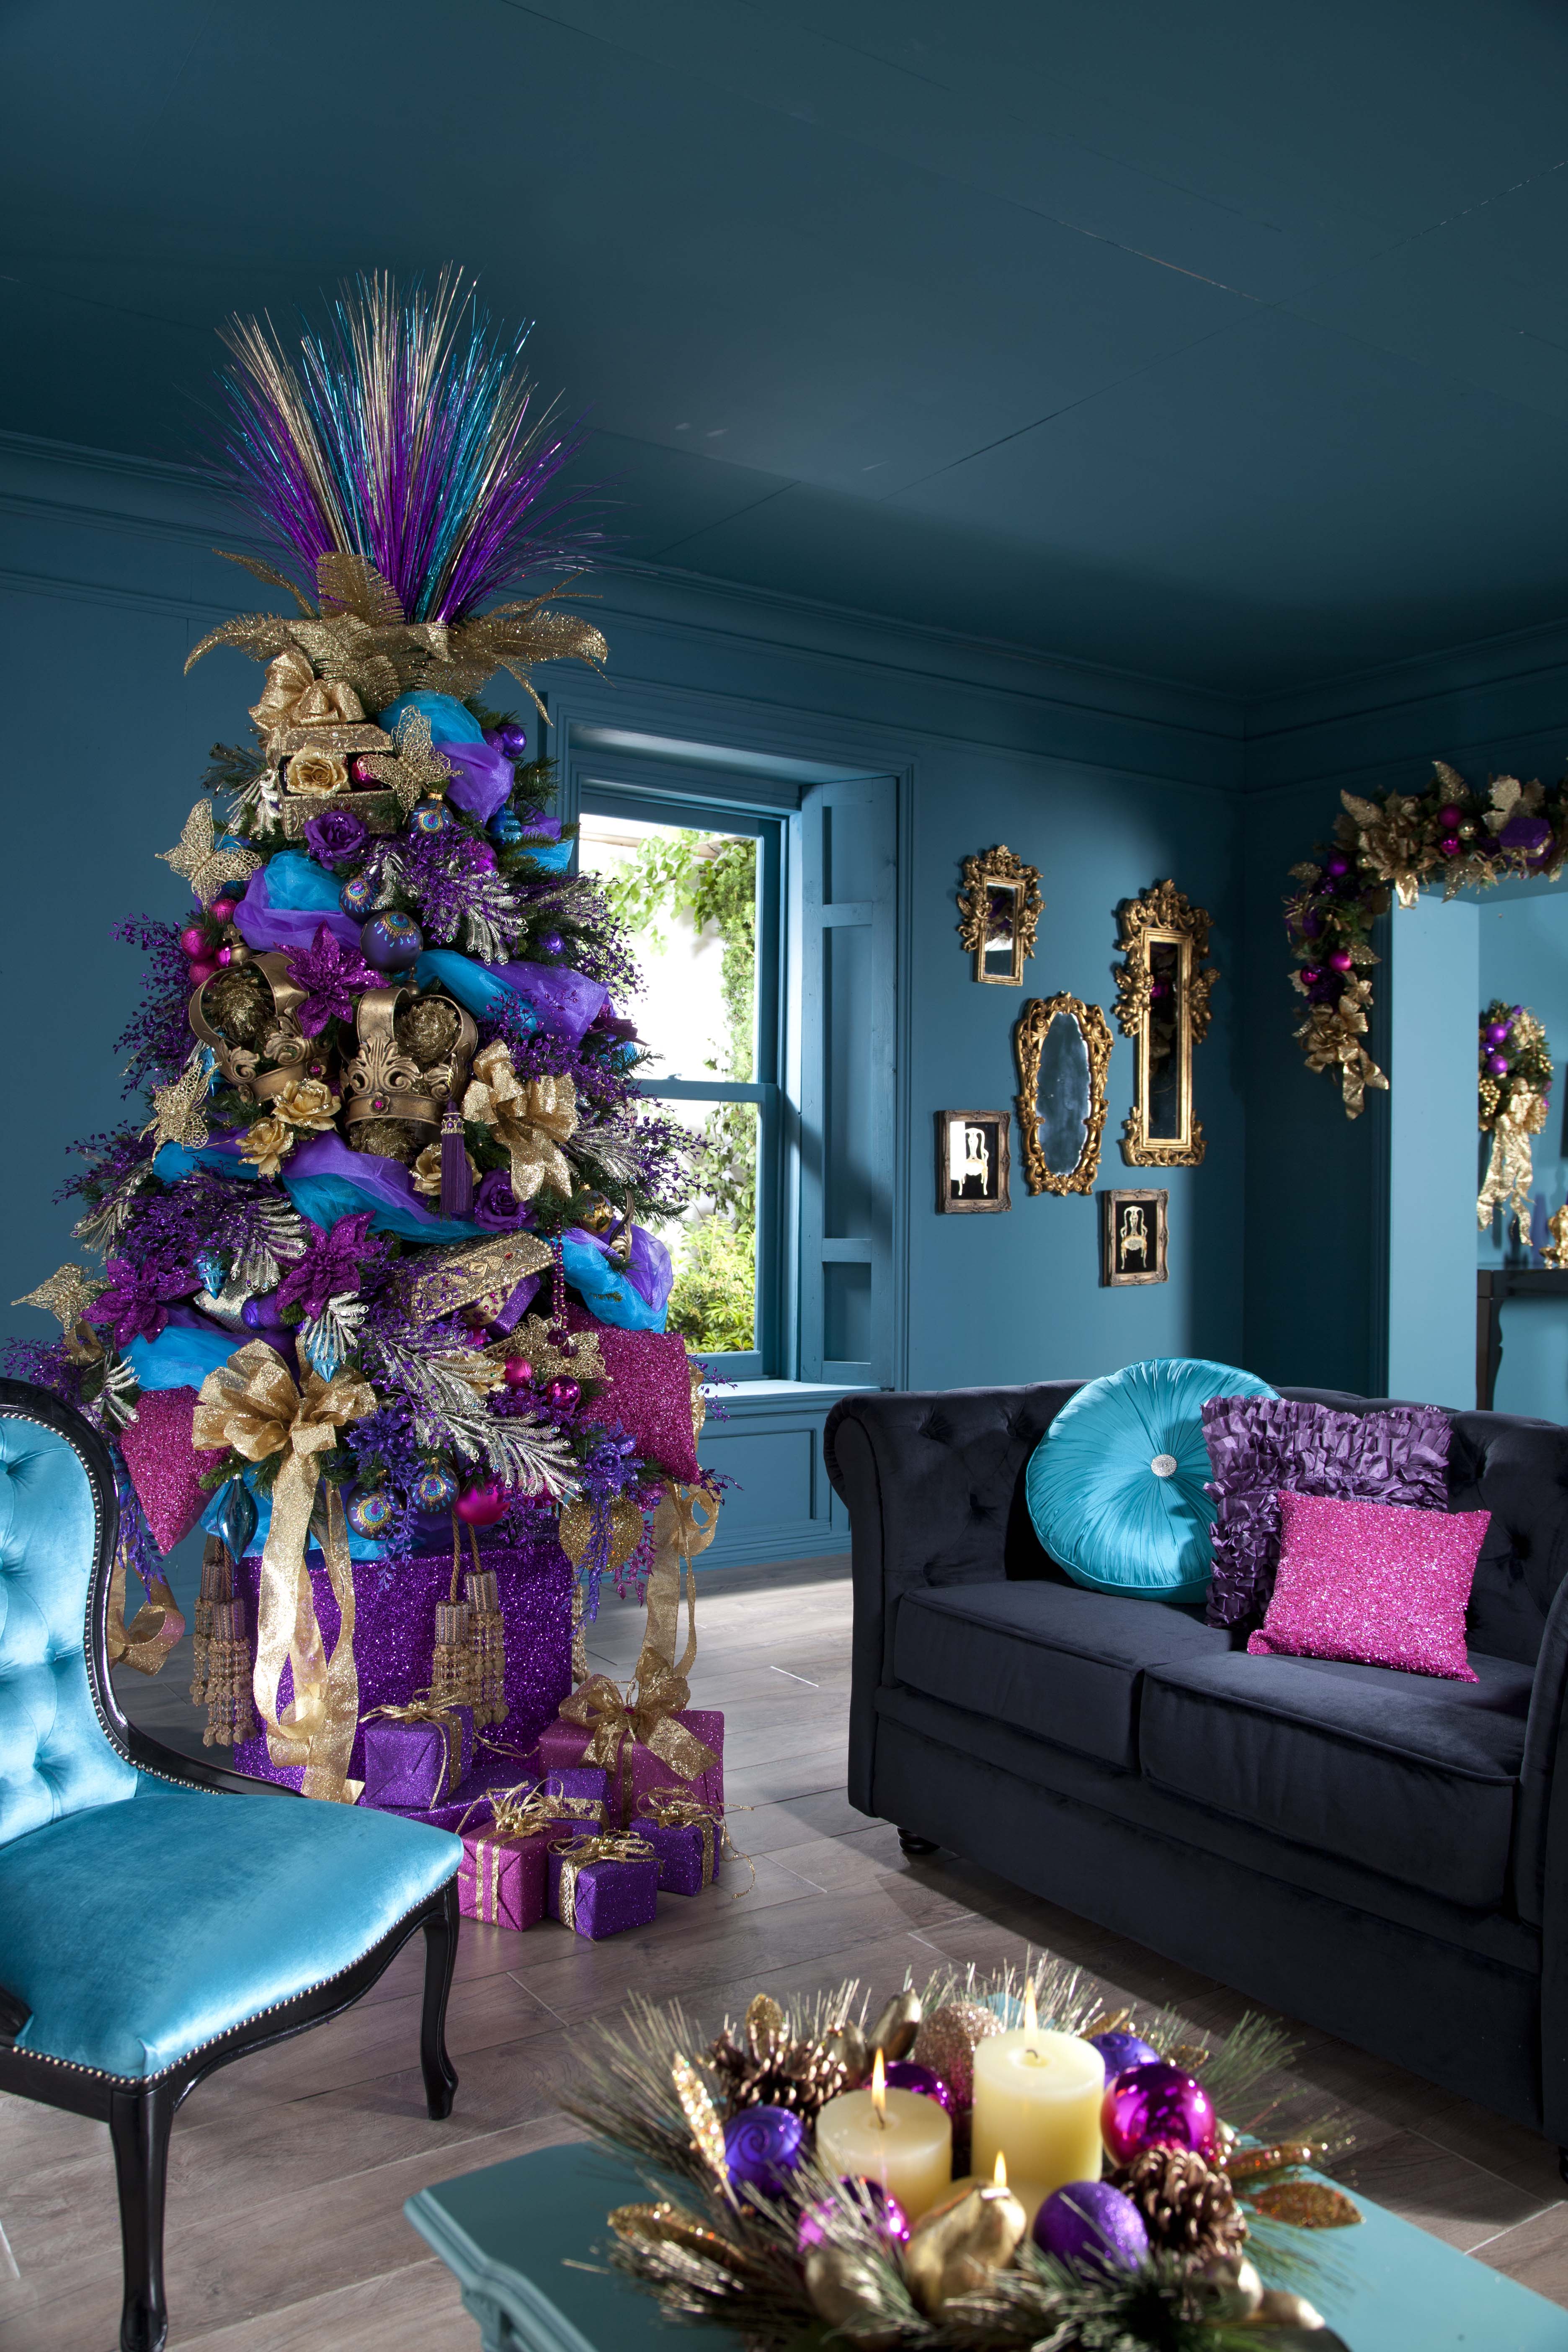 Indoor Decor Ways to make your home festive during the